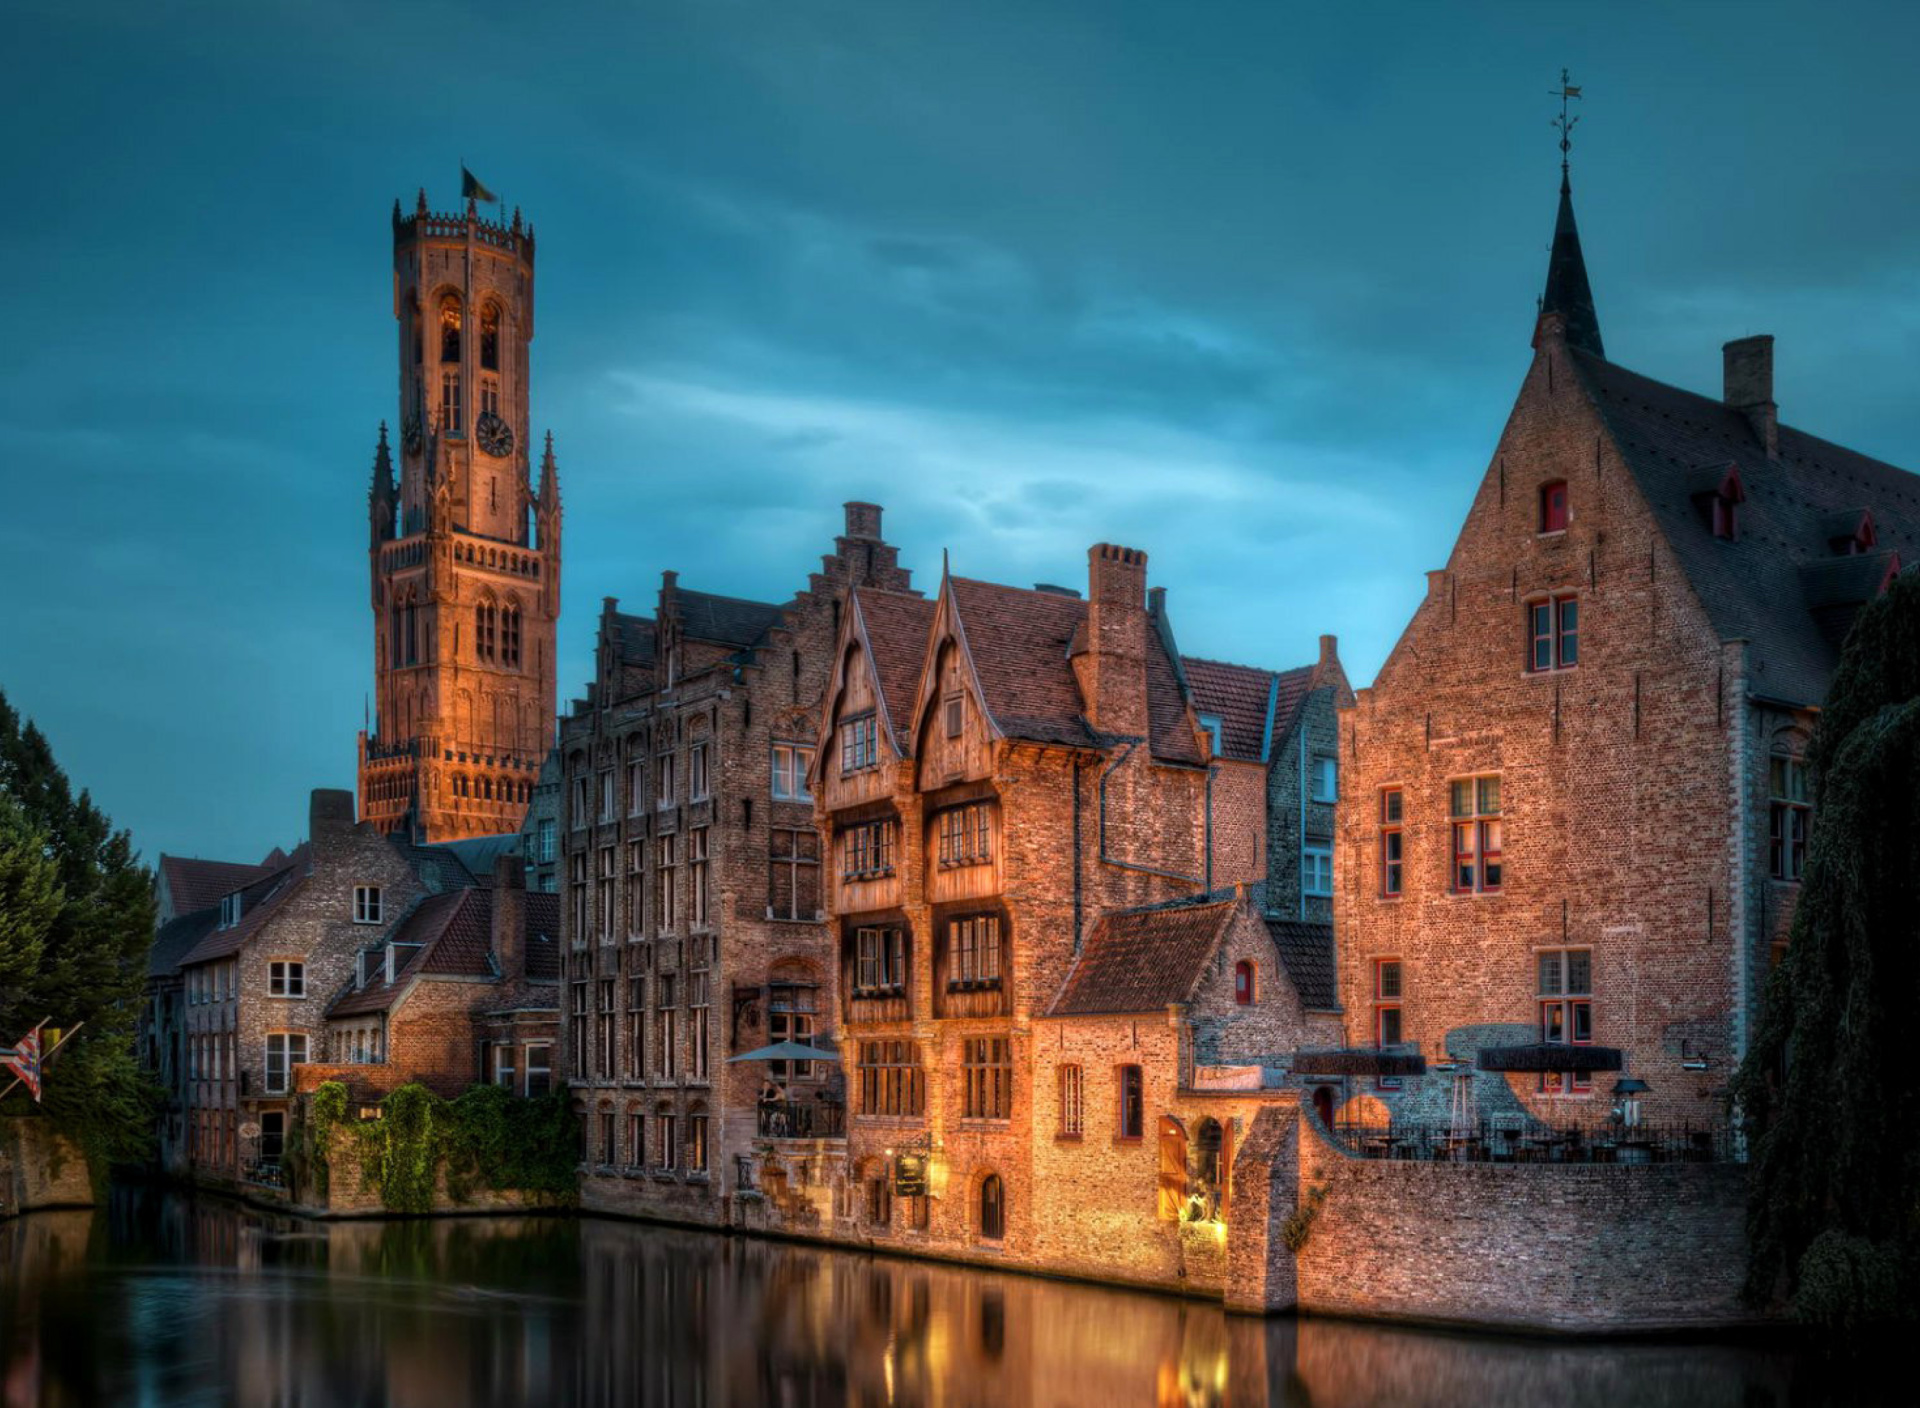 Bruges city on canal screenshot #1 1920x1408